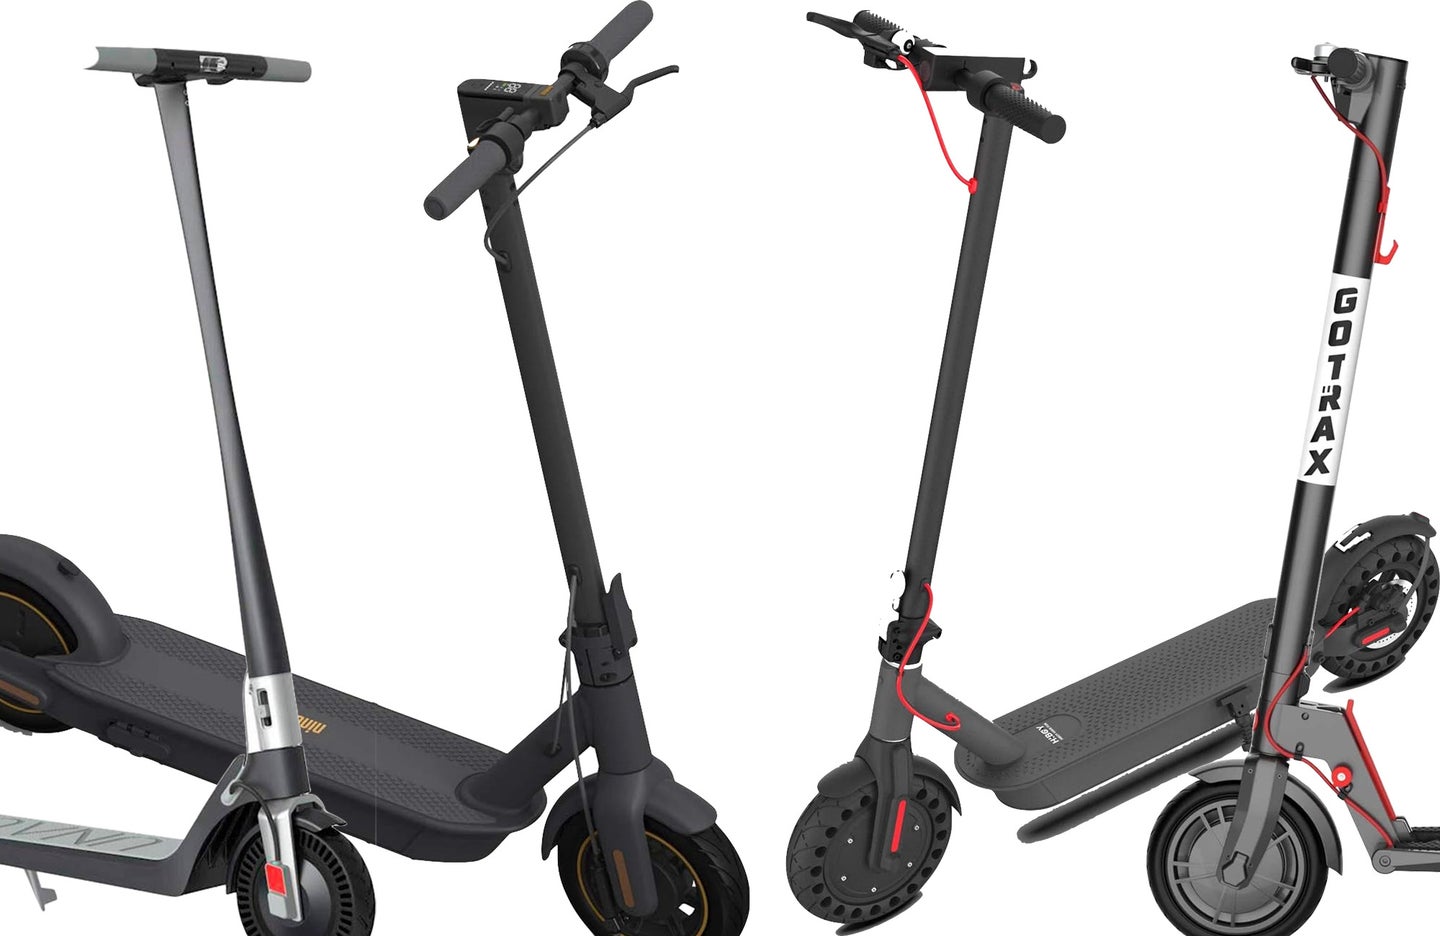 Save money and have fun getting where you need to go on one of the best electric scooters.